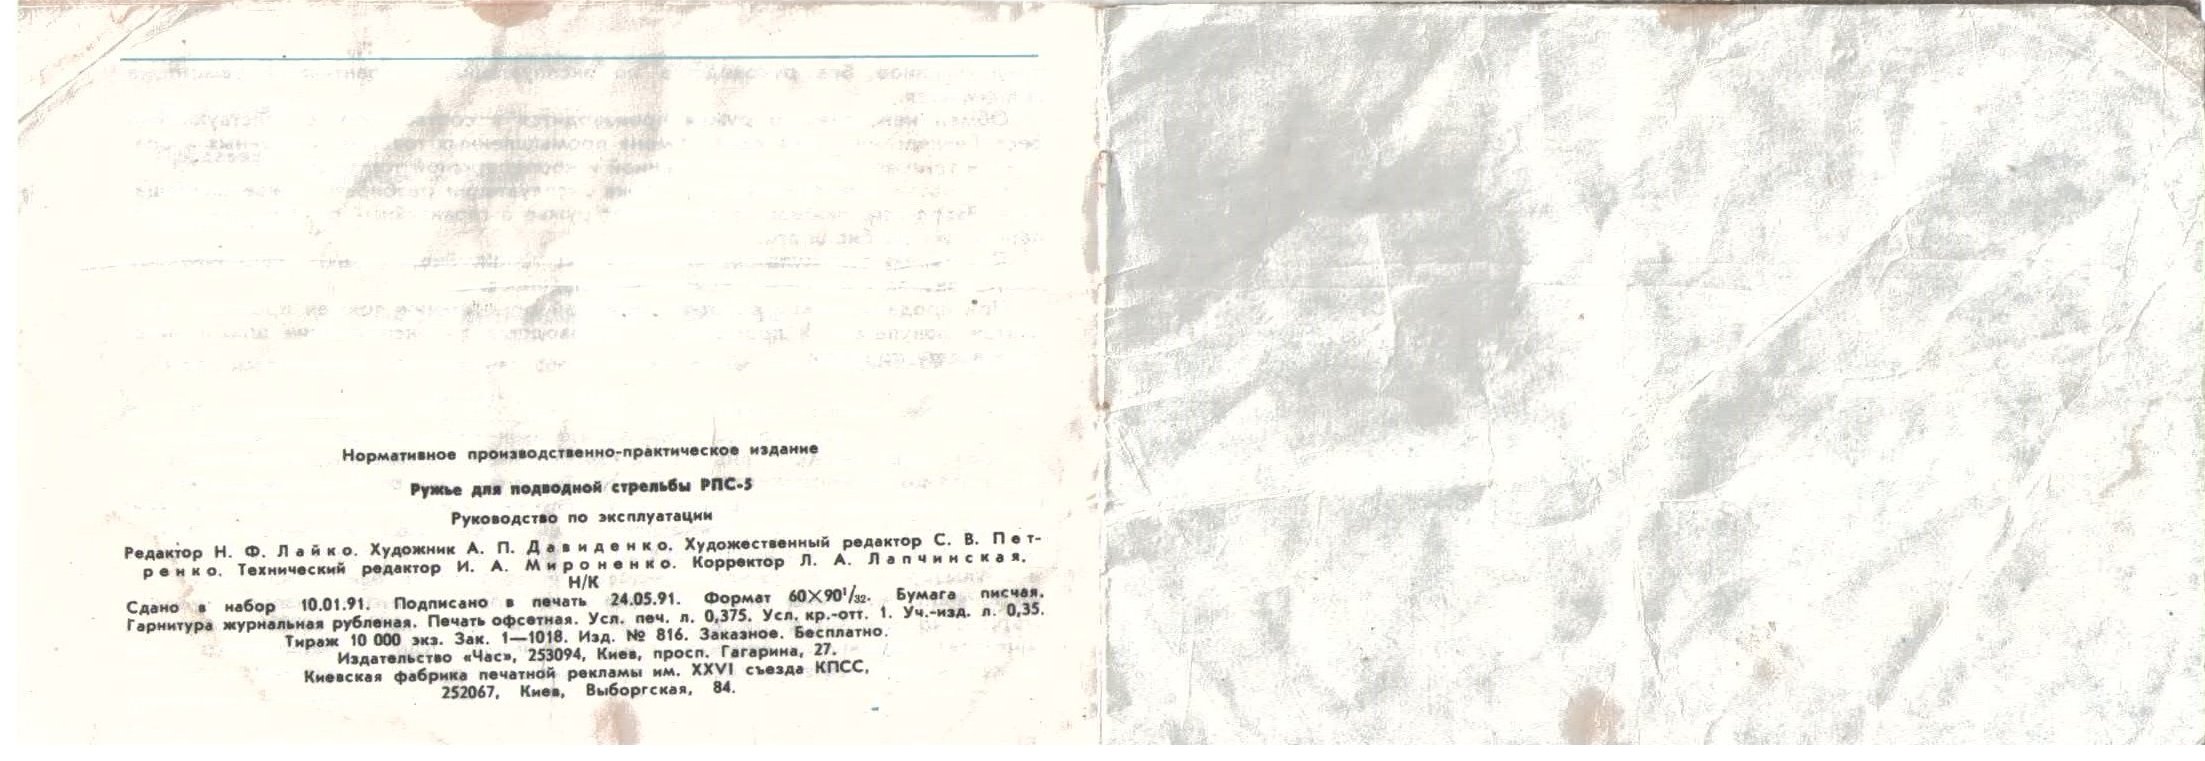 RPS-5 passport page 10 and page 11.jpg